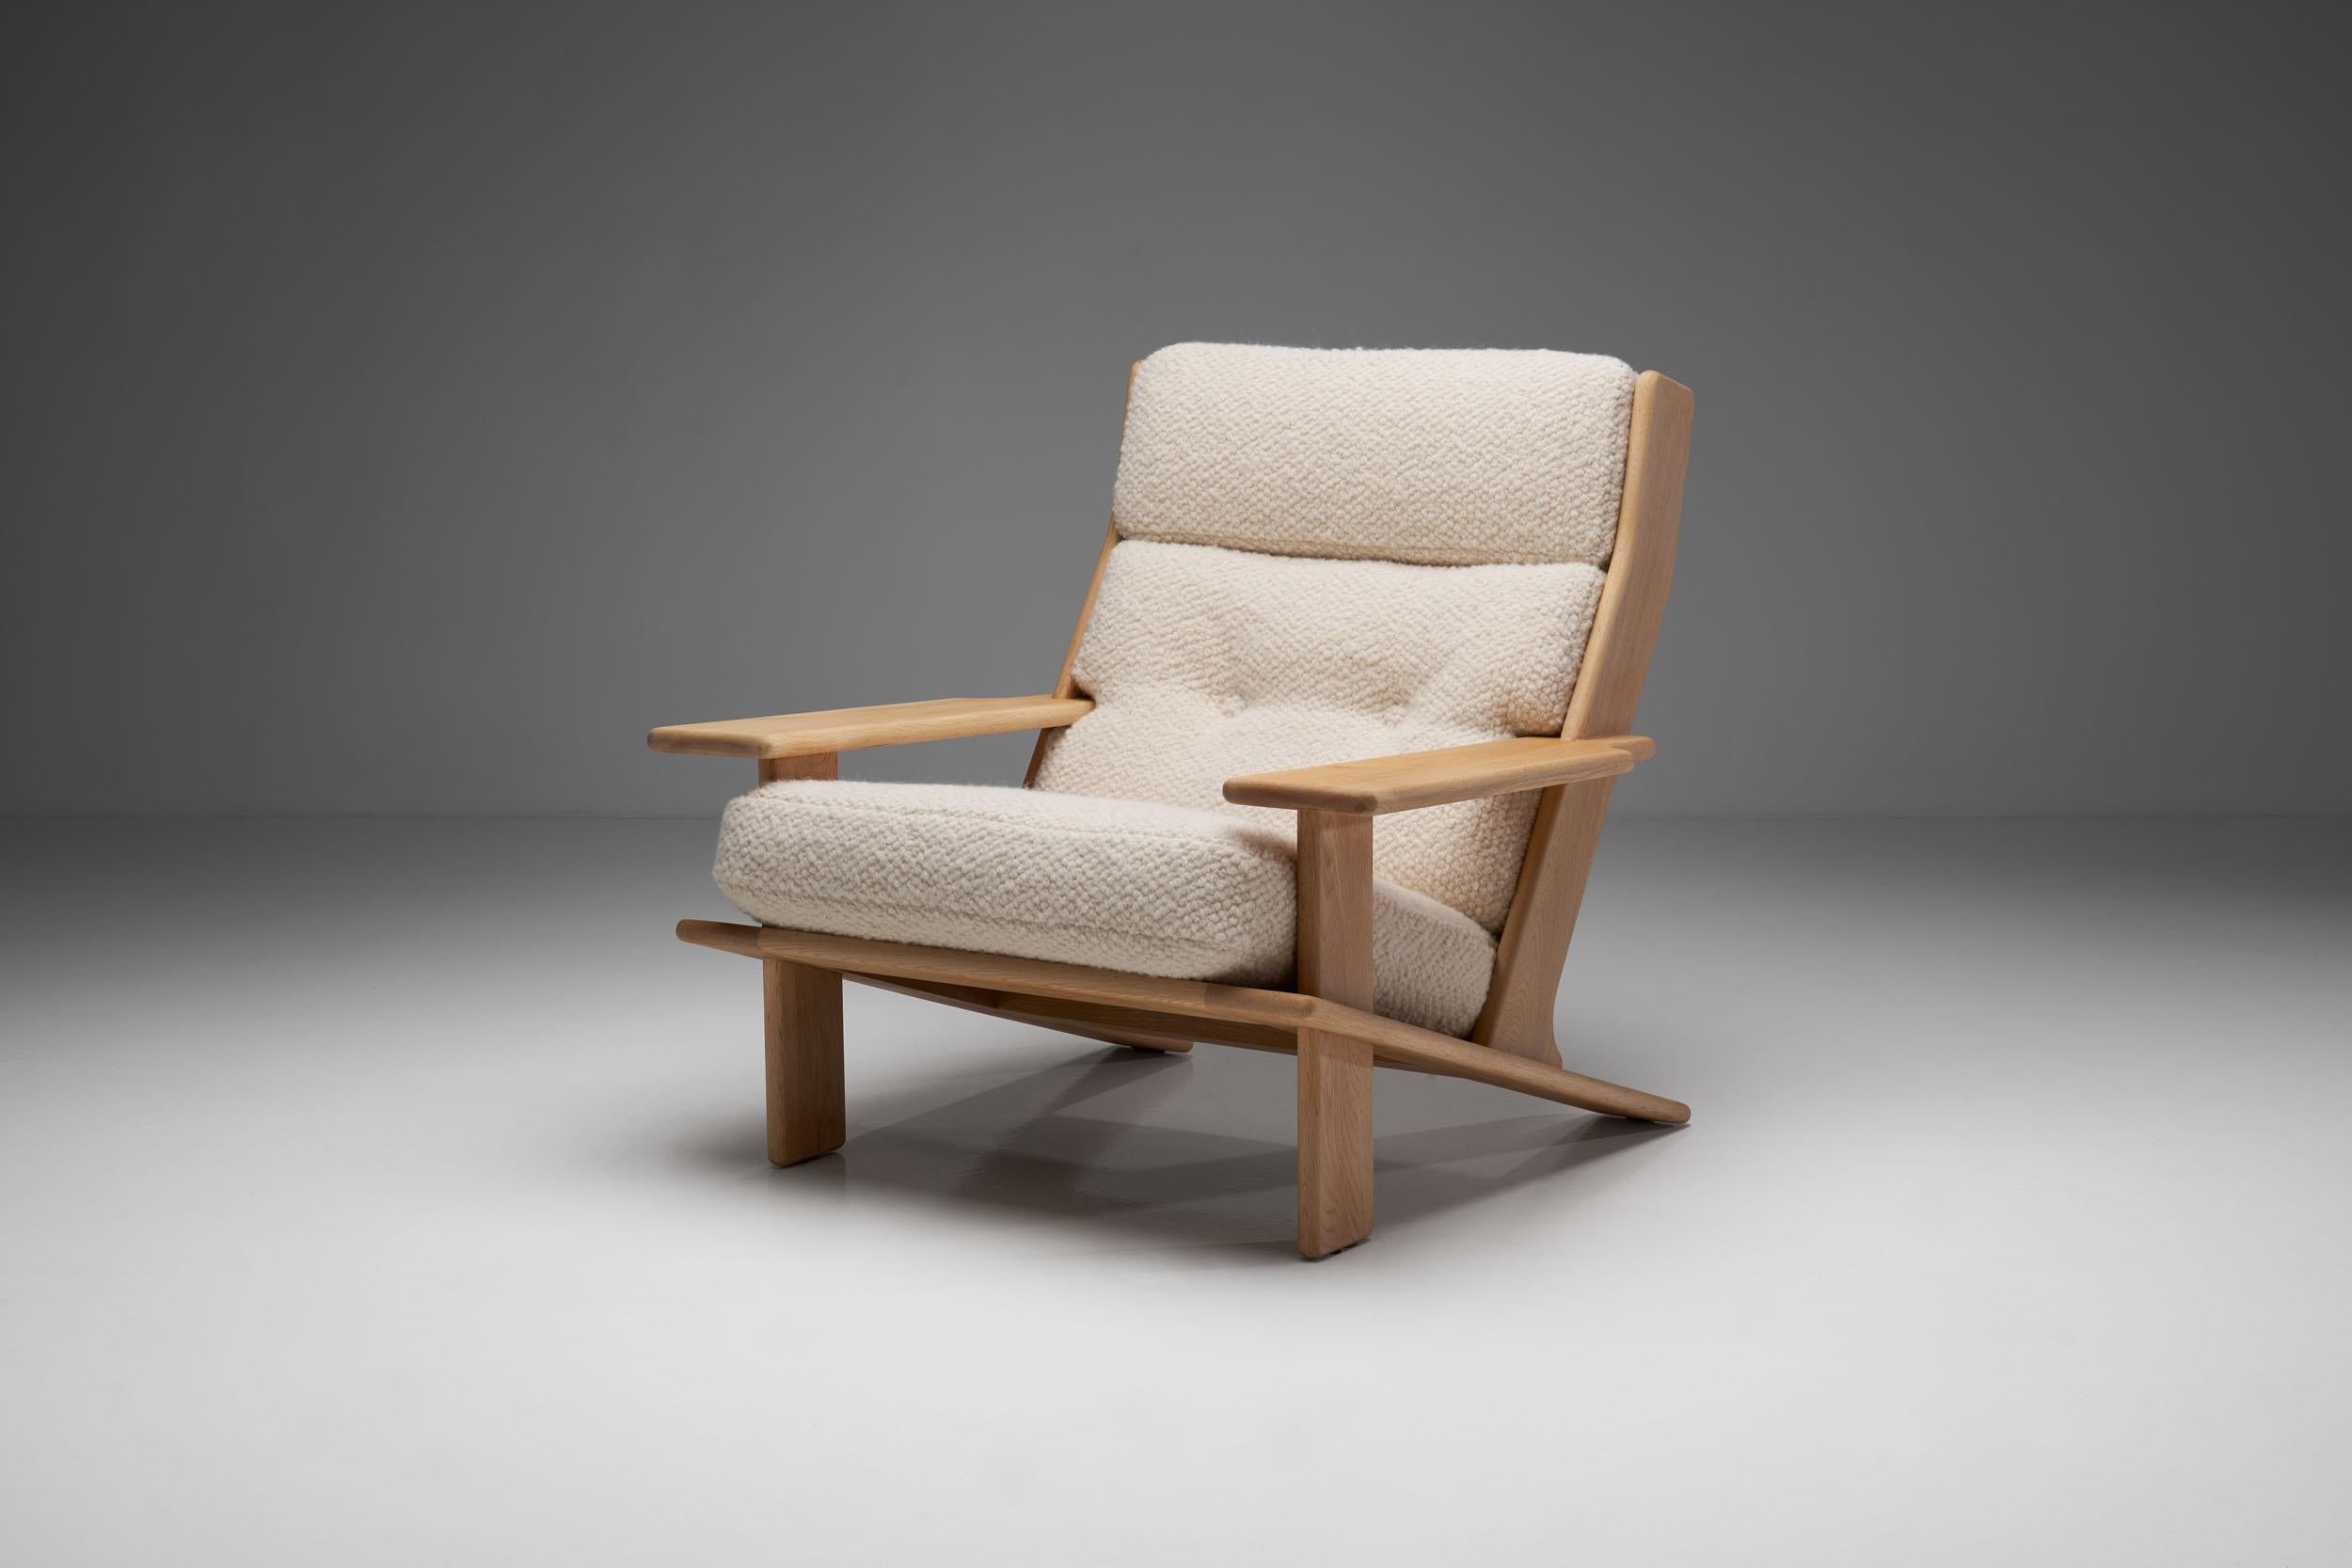 Rare “Pele” lounge chair by Finnish designer Esko Pajamies, manufactured by the Finnish furniture company, Lahden Lepokalusto Oy in the 1970s.

This “Pele” lounge chair is made from solid oak. The wooden frame has a beautiful matte finish, while